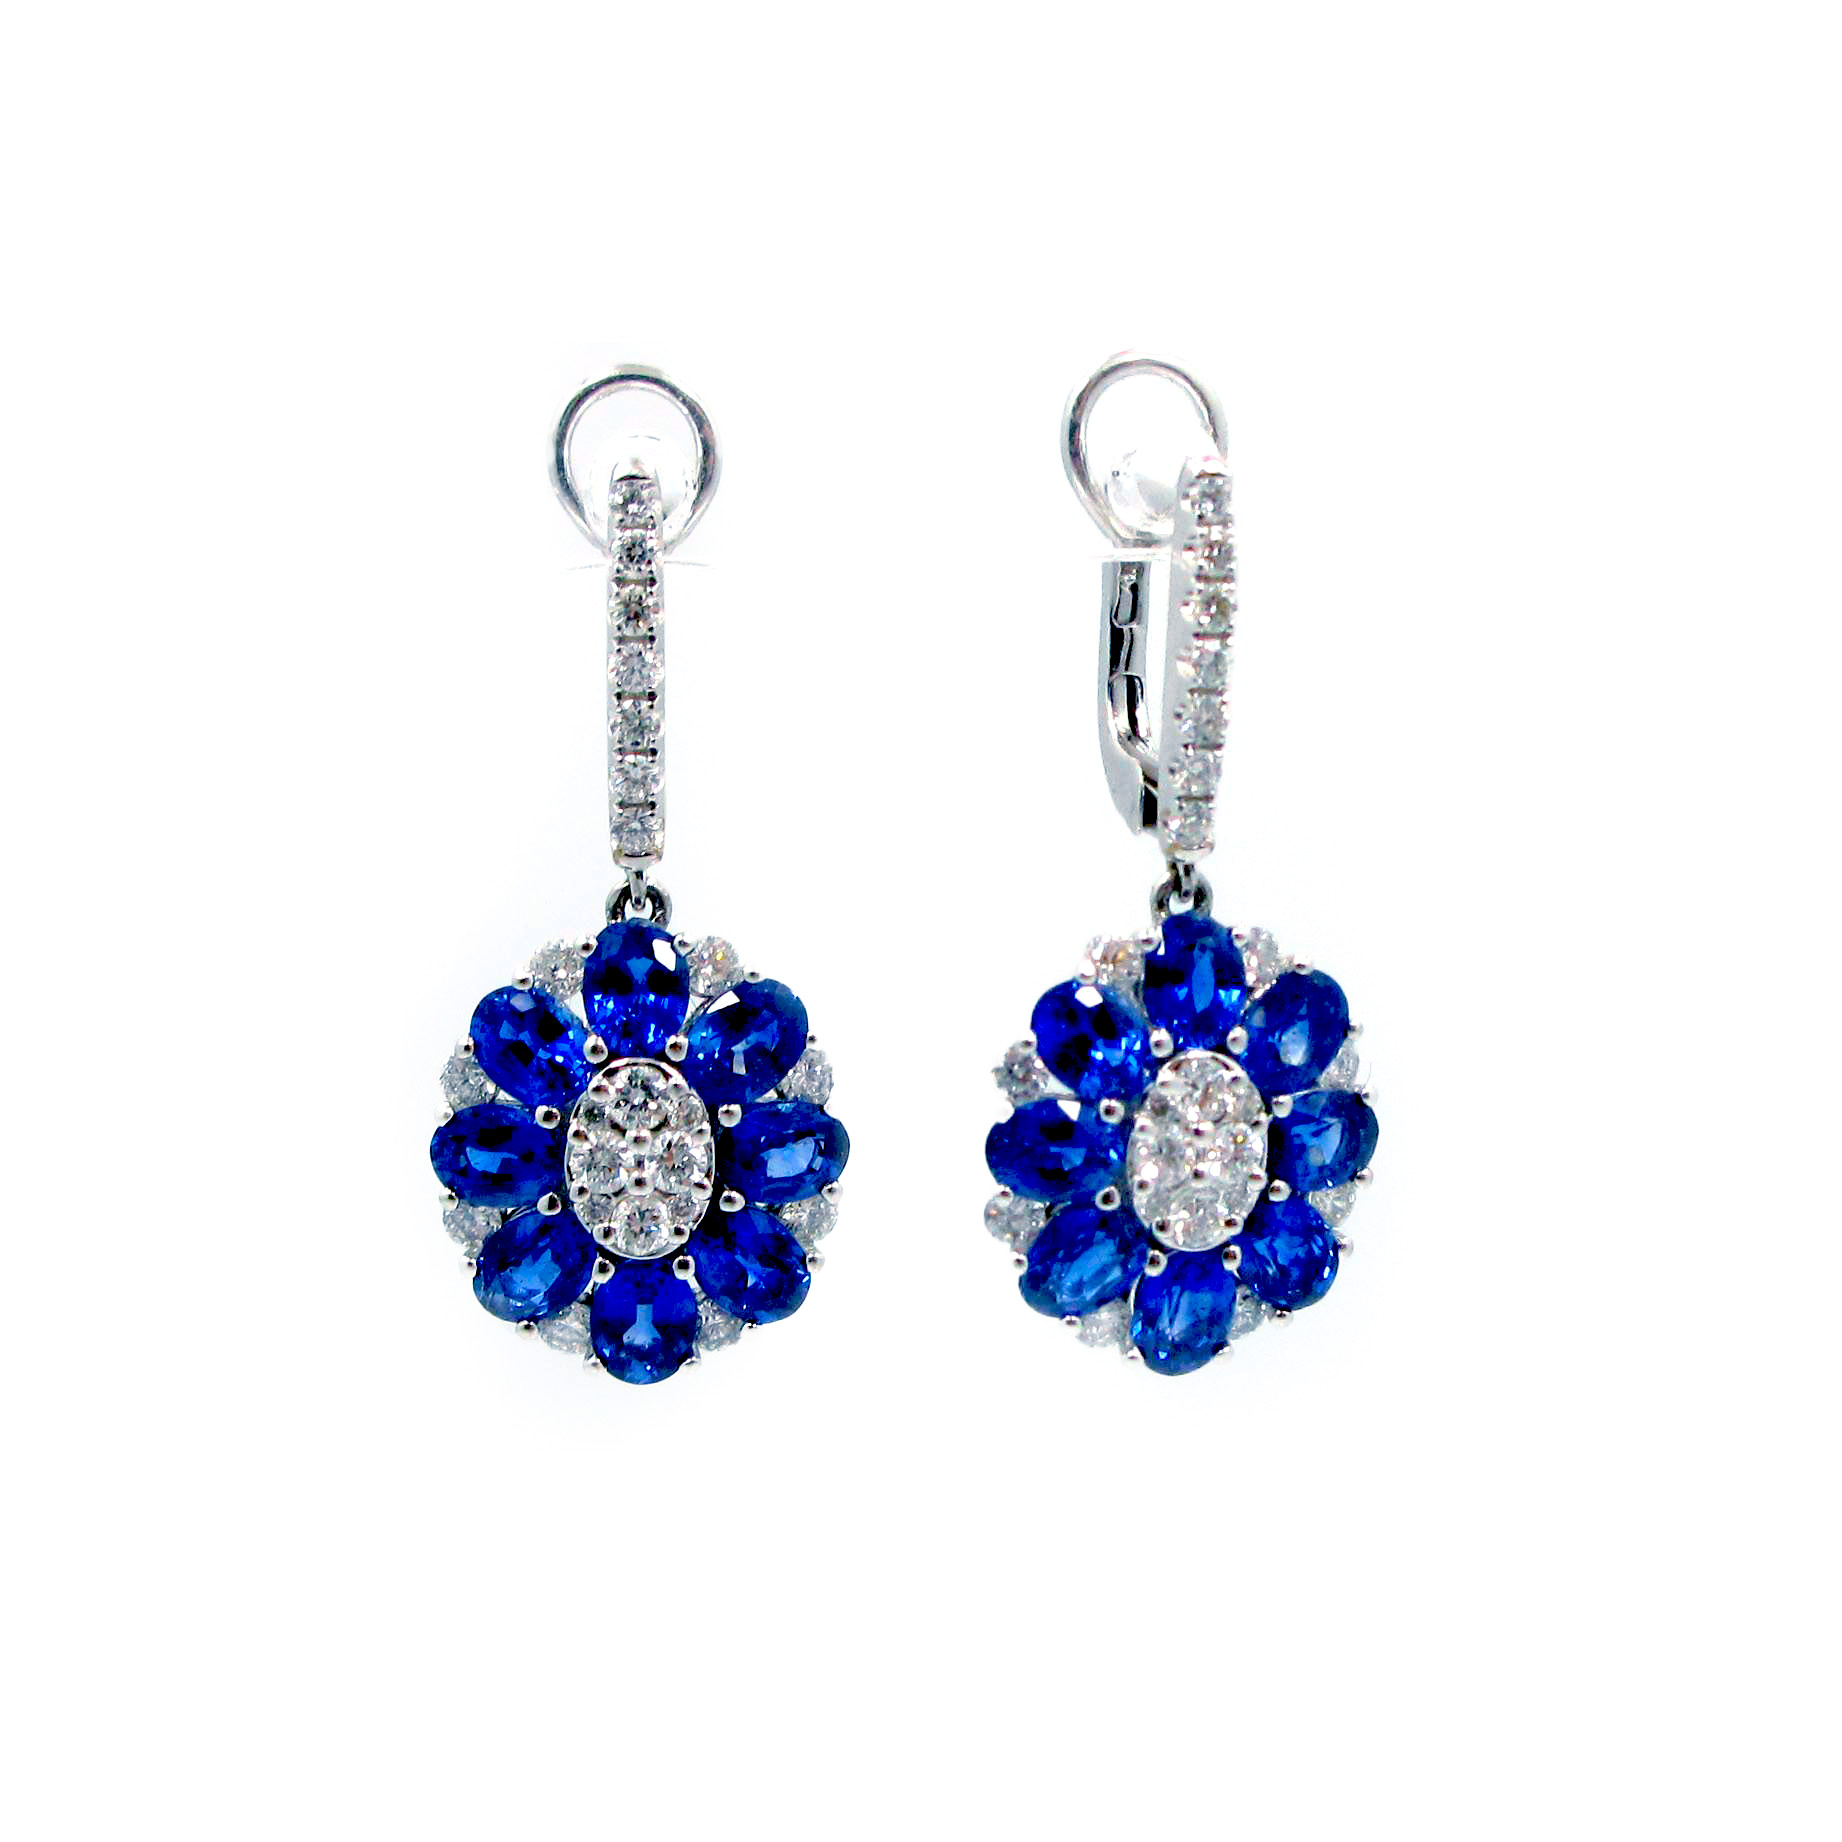 This is a picture of Blue Sapphire and Diamond Floral Earrings